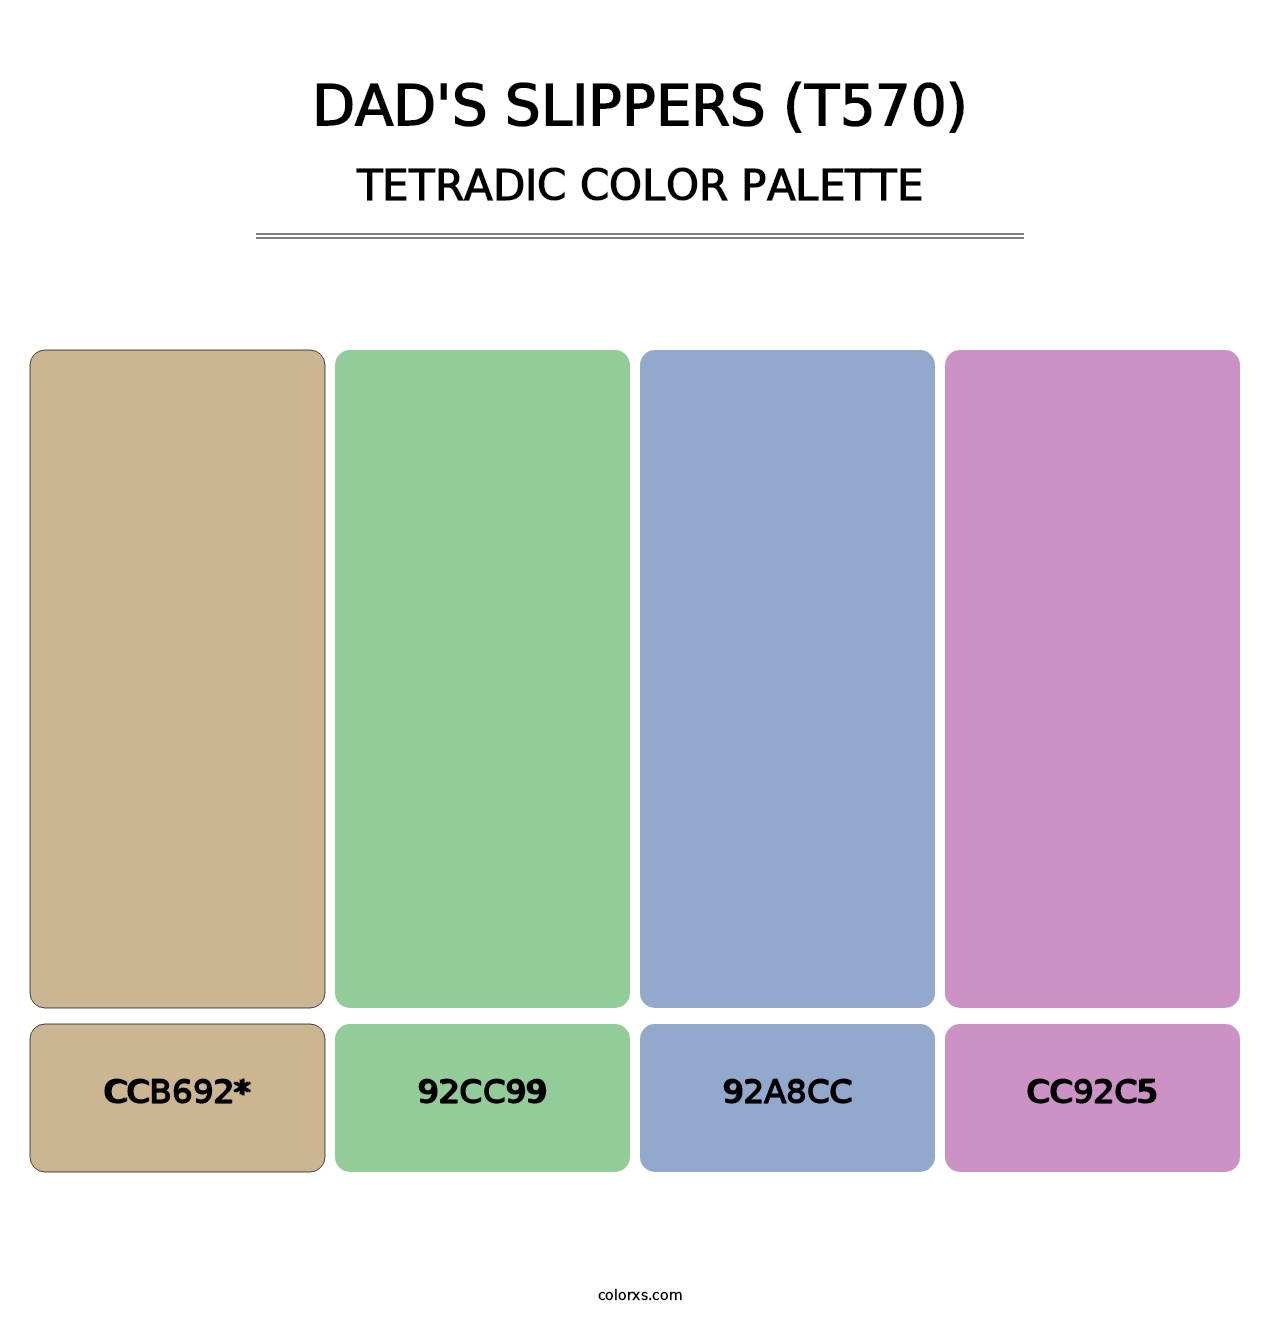 Dad's Slippers (T570) - Tetradic Color Palette